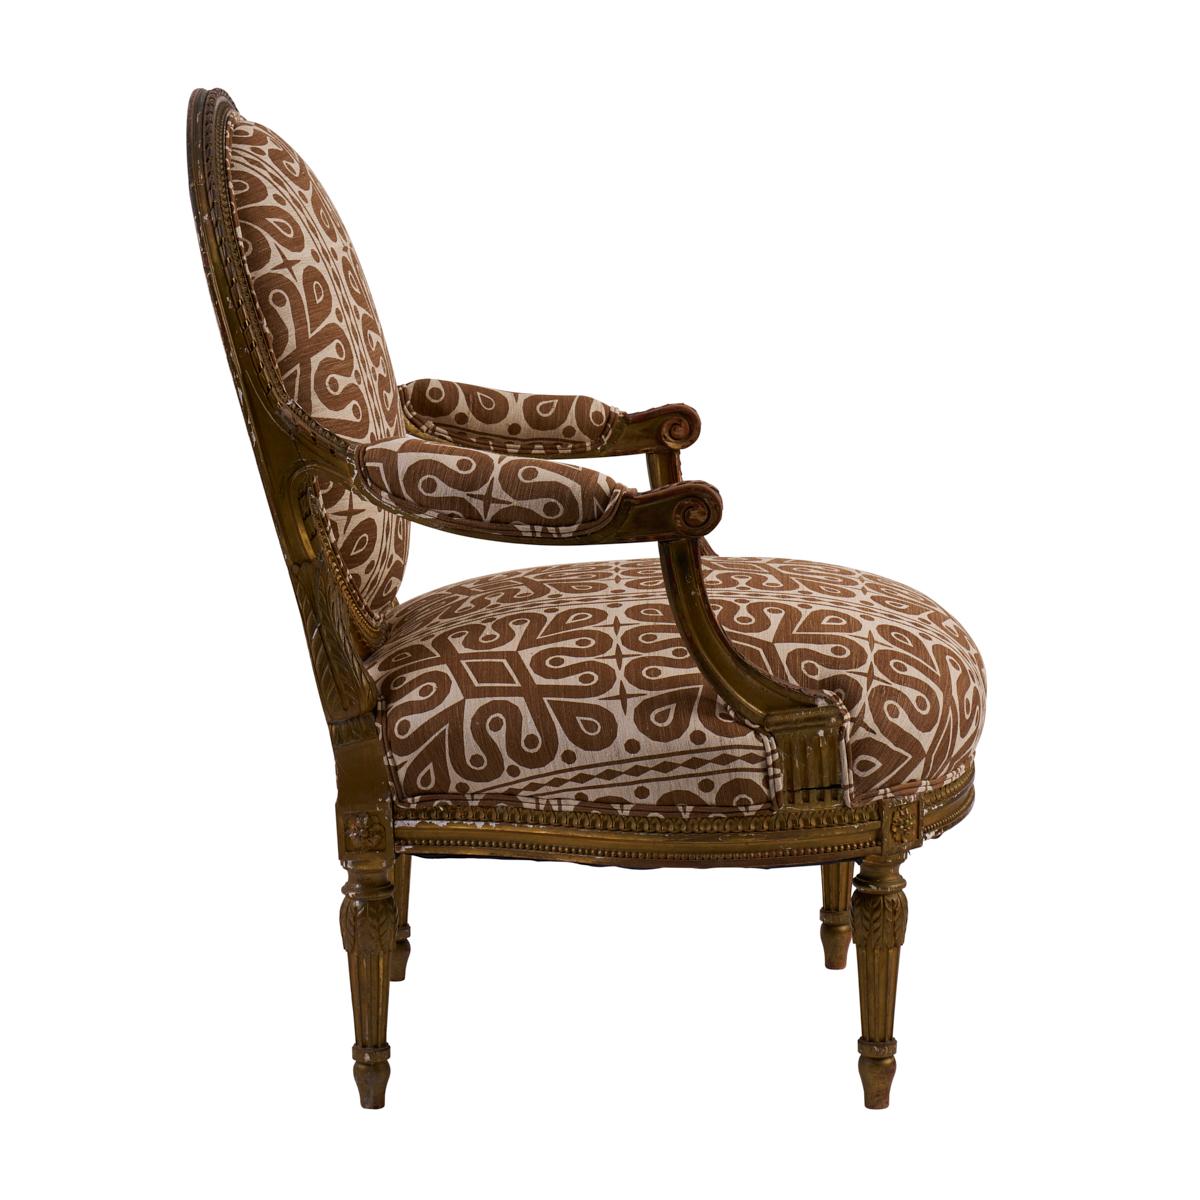 Discovered in the South of France, these dressy 19th-century fauteuils have the oval backs, scrolled handrests and straight legs associated with Louis XVI pieces. Newly upholstered in Schumacher's Borneo Silk fabric by Celerie Kemble for Schumacher,